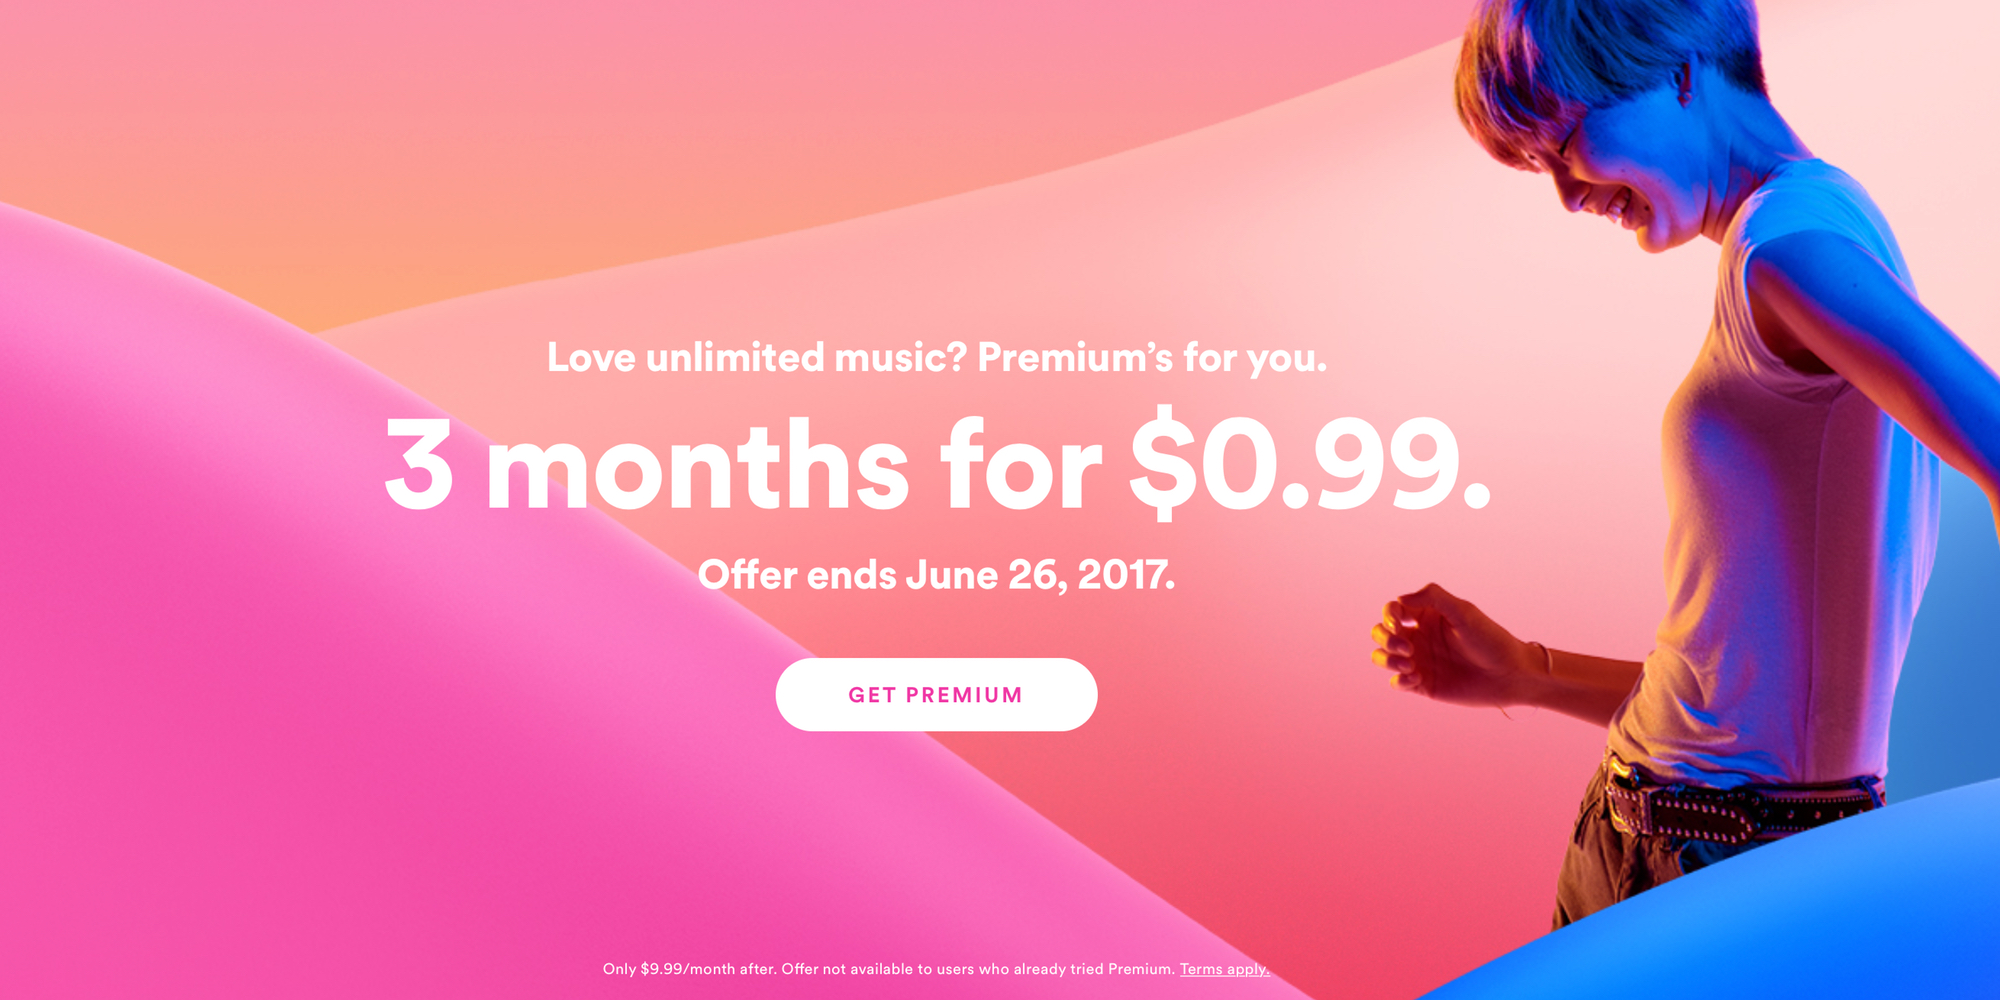 spotify free trial 3 months